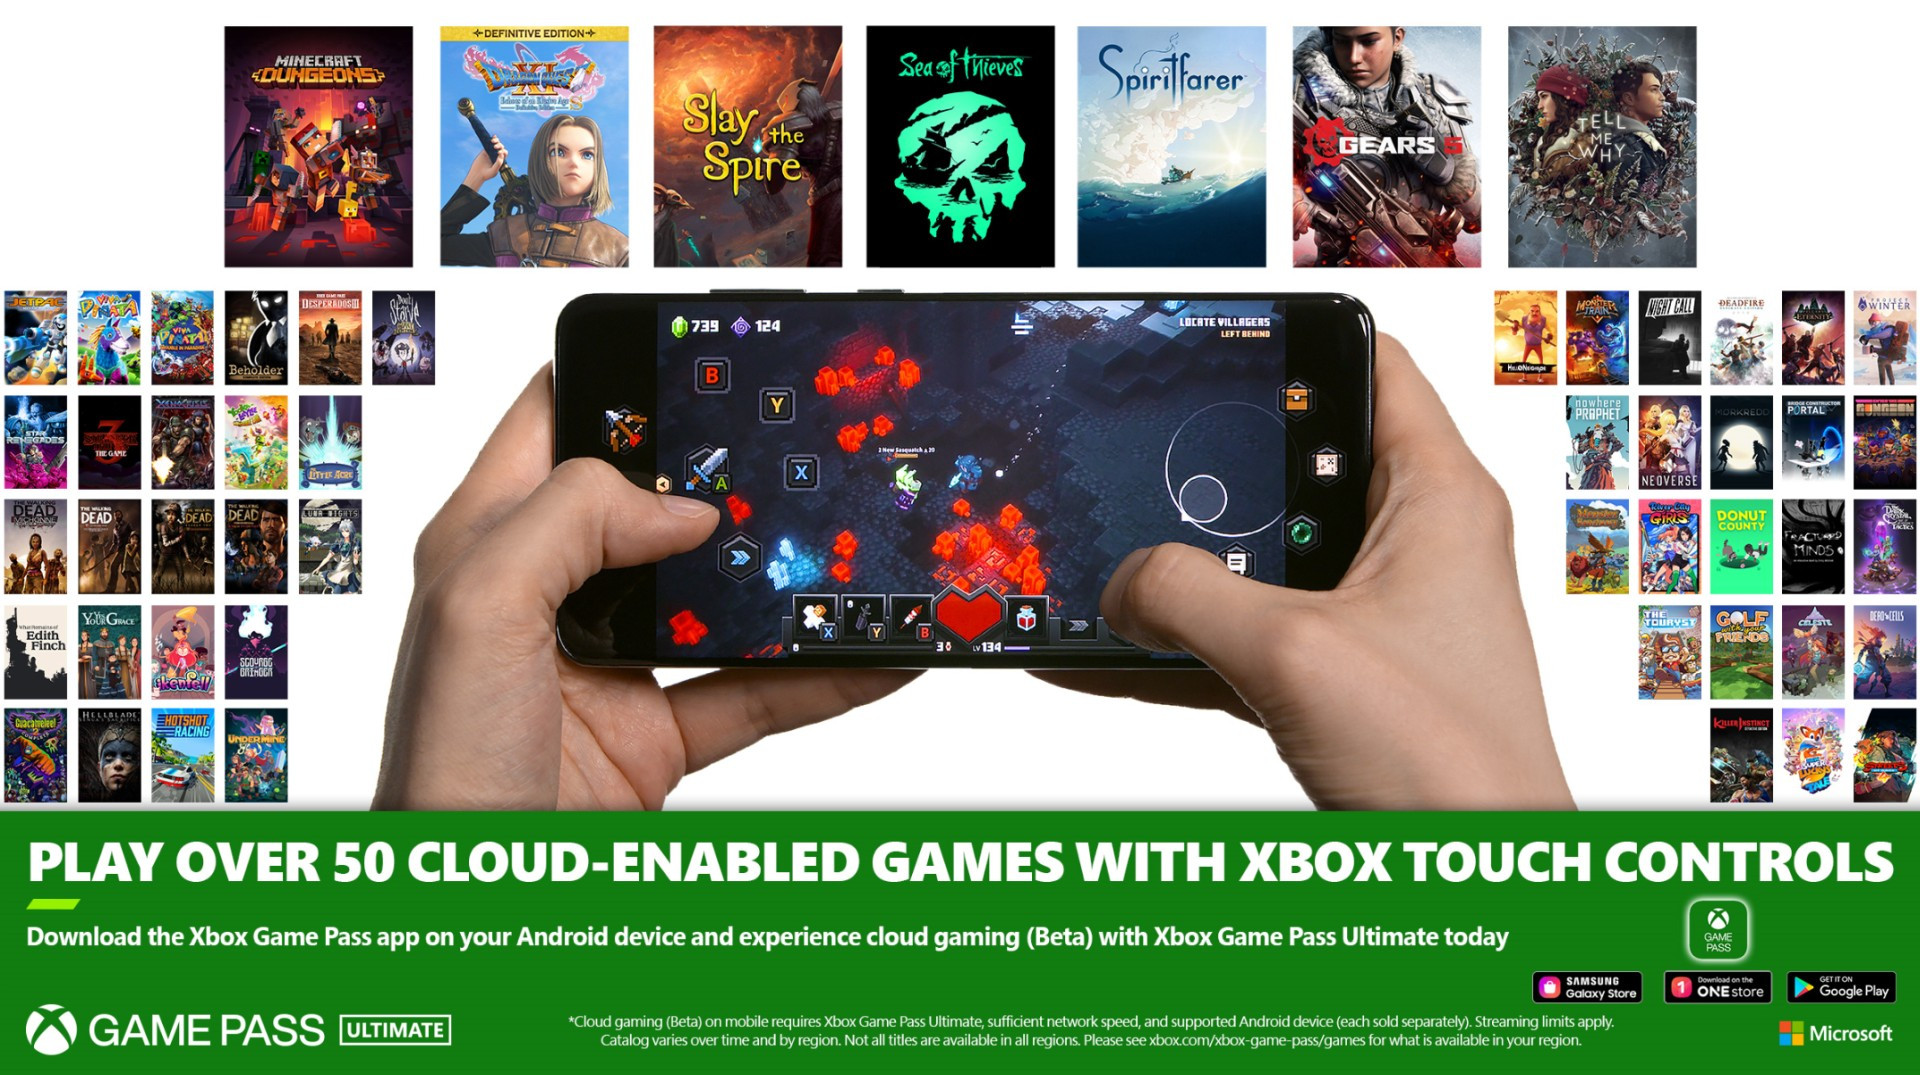 Xbox Cloud Gaming Beta for iOS Review: Microsoft Goes Mobile